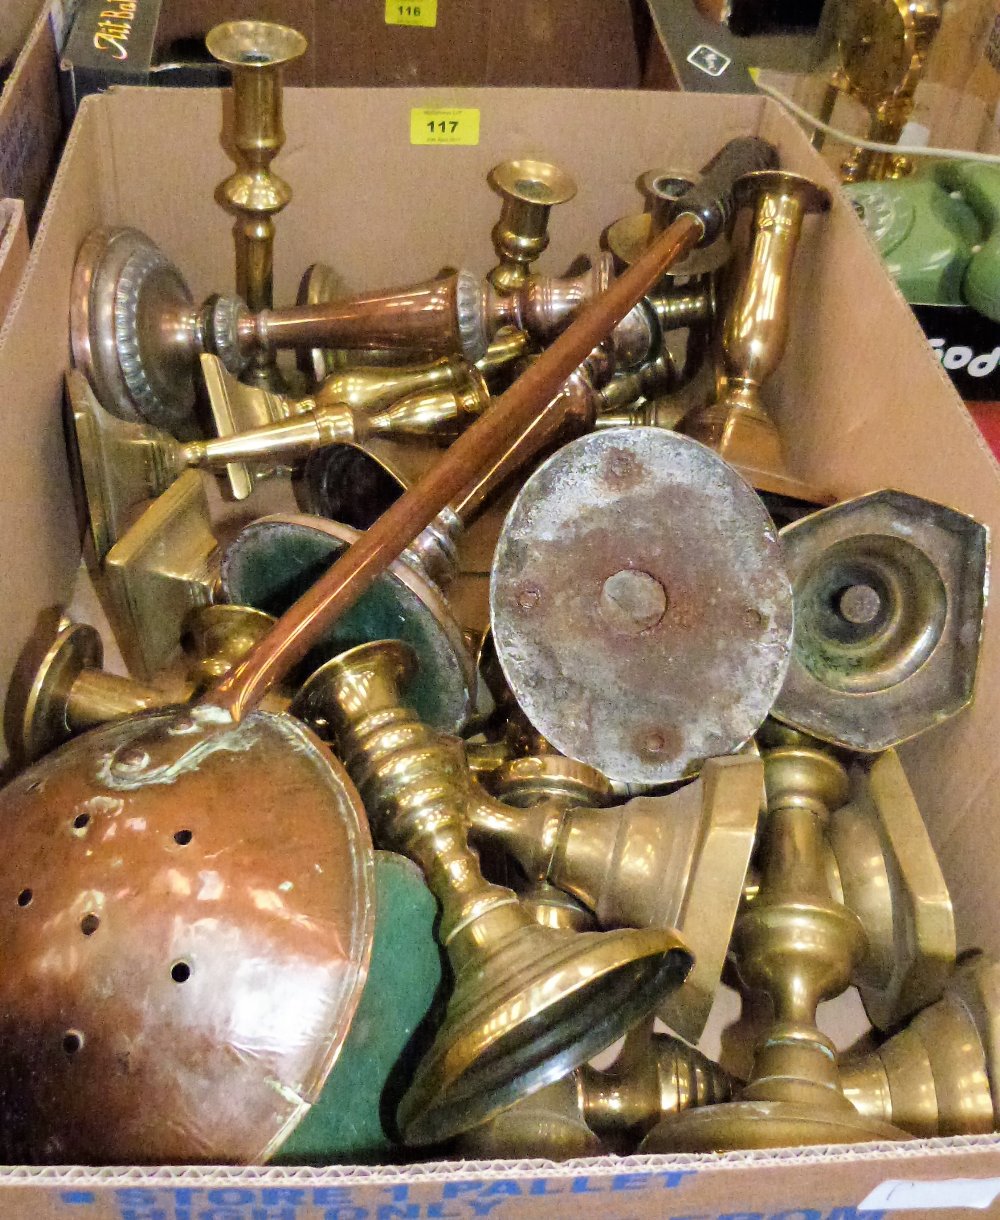 A collection of 19th century brass candlesticks and other metalware